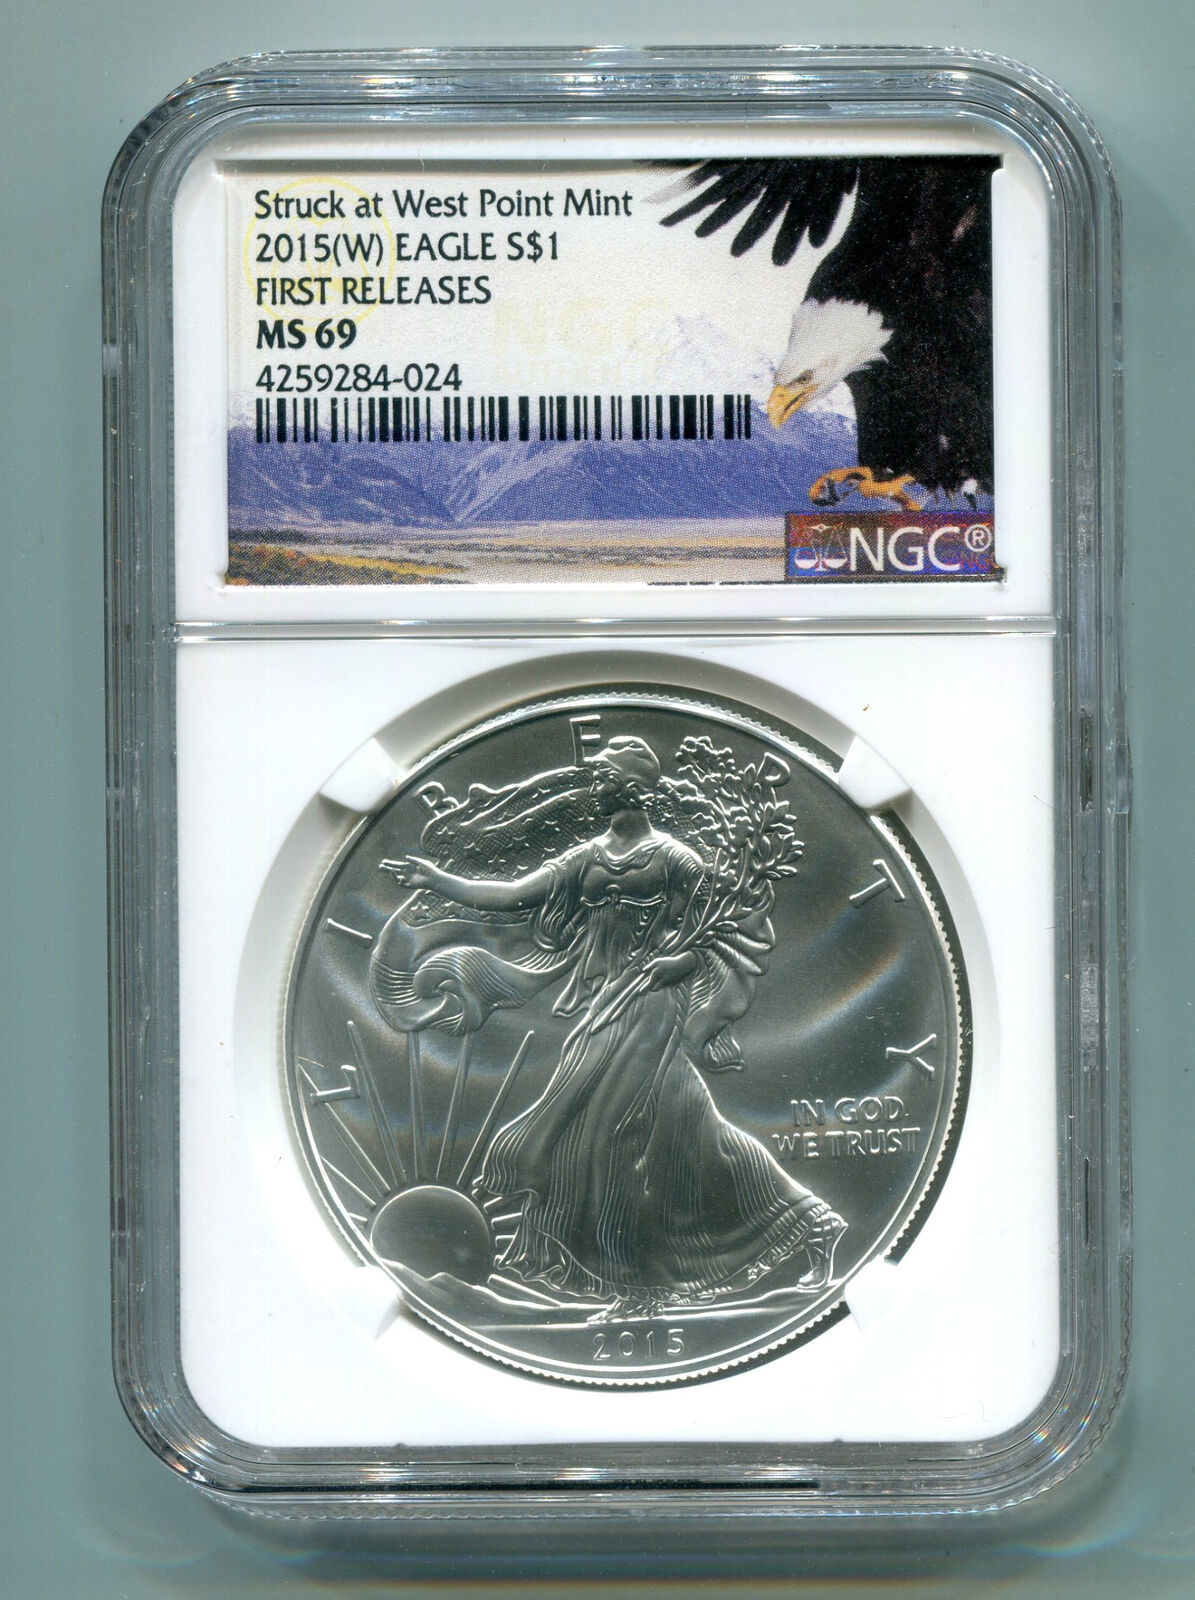 Primary image for 2015(W) SILVER EAGLE STRUCK AT WEST POINT MINT NGC MS69 EARLY RELEASES EAGLE